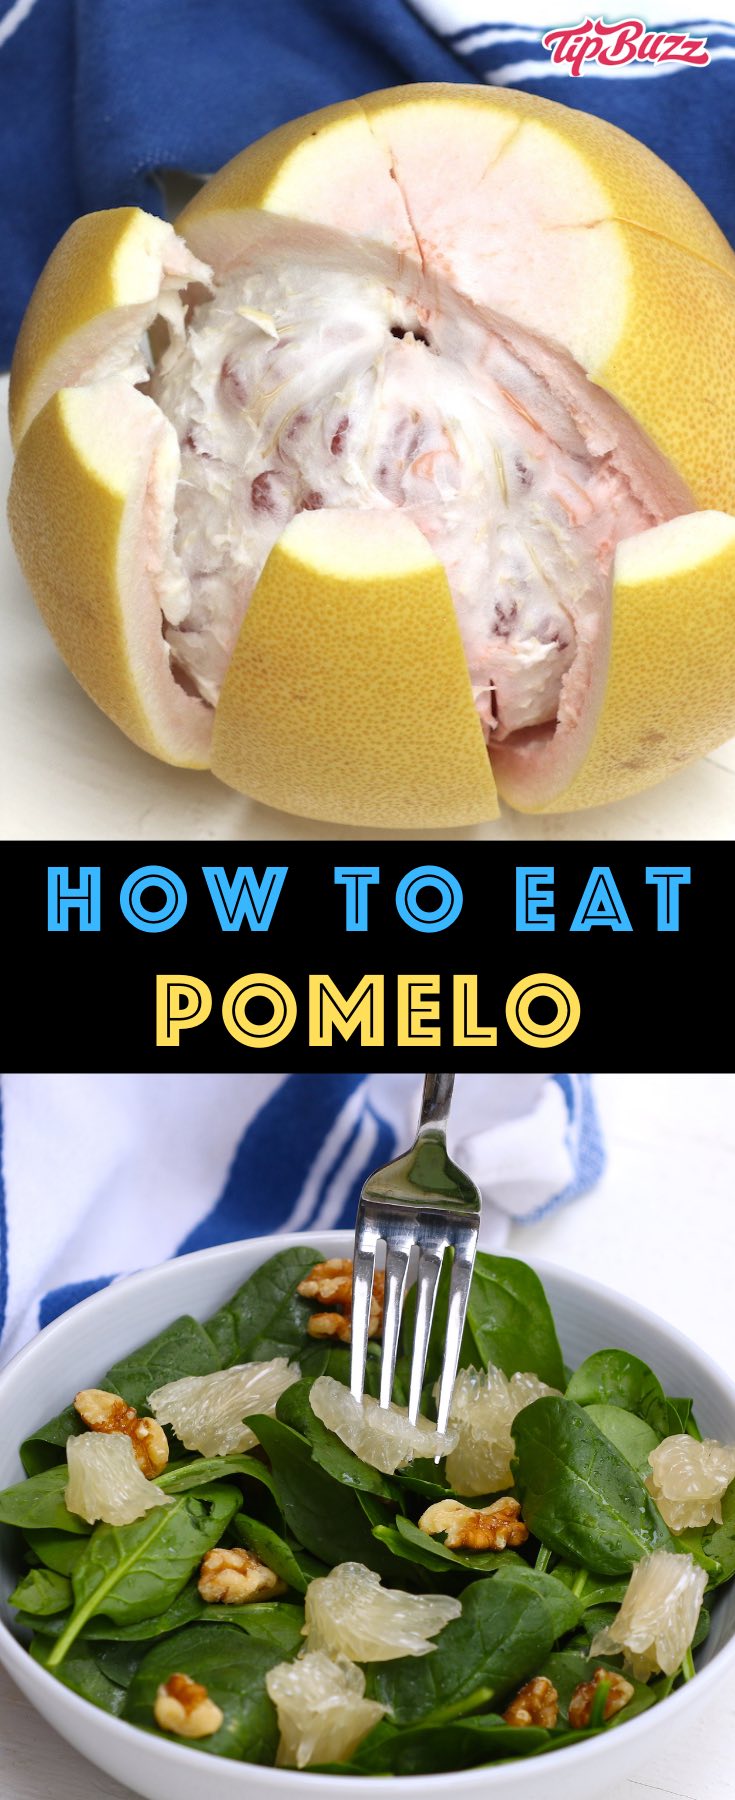 Pomelo is a large citrus fruit with a refreshing sweet and mild taste. Here we cover what is a pomelo, some of its health benefits and how it compares to grapefruit. We also explain different ways to eat pomelo.